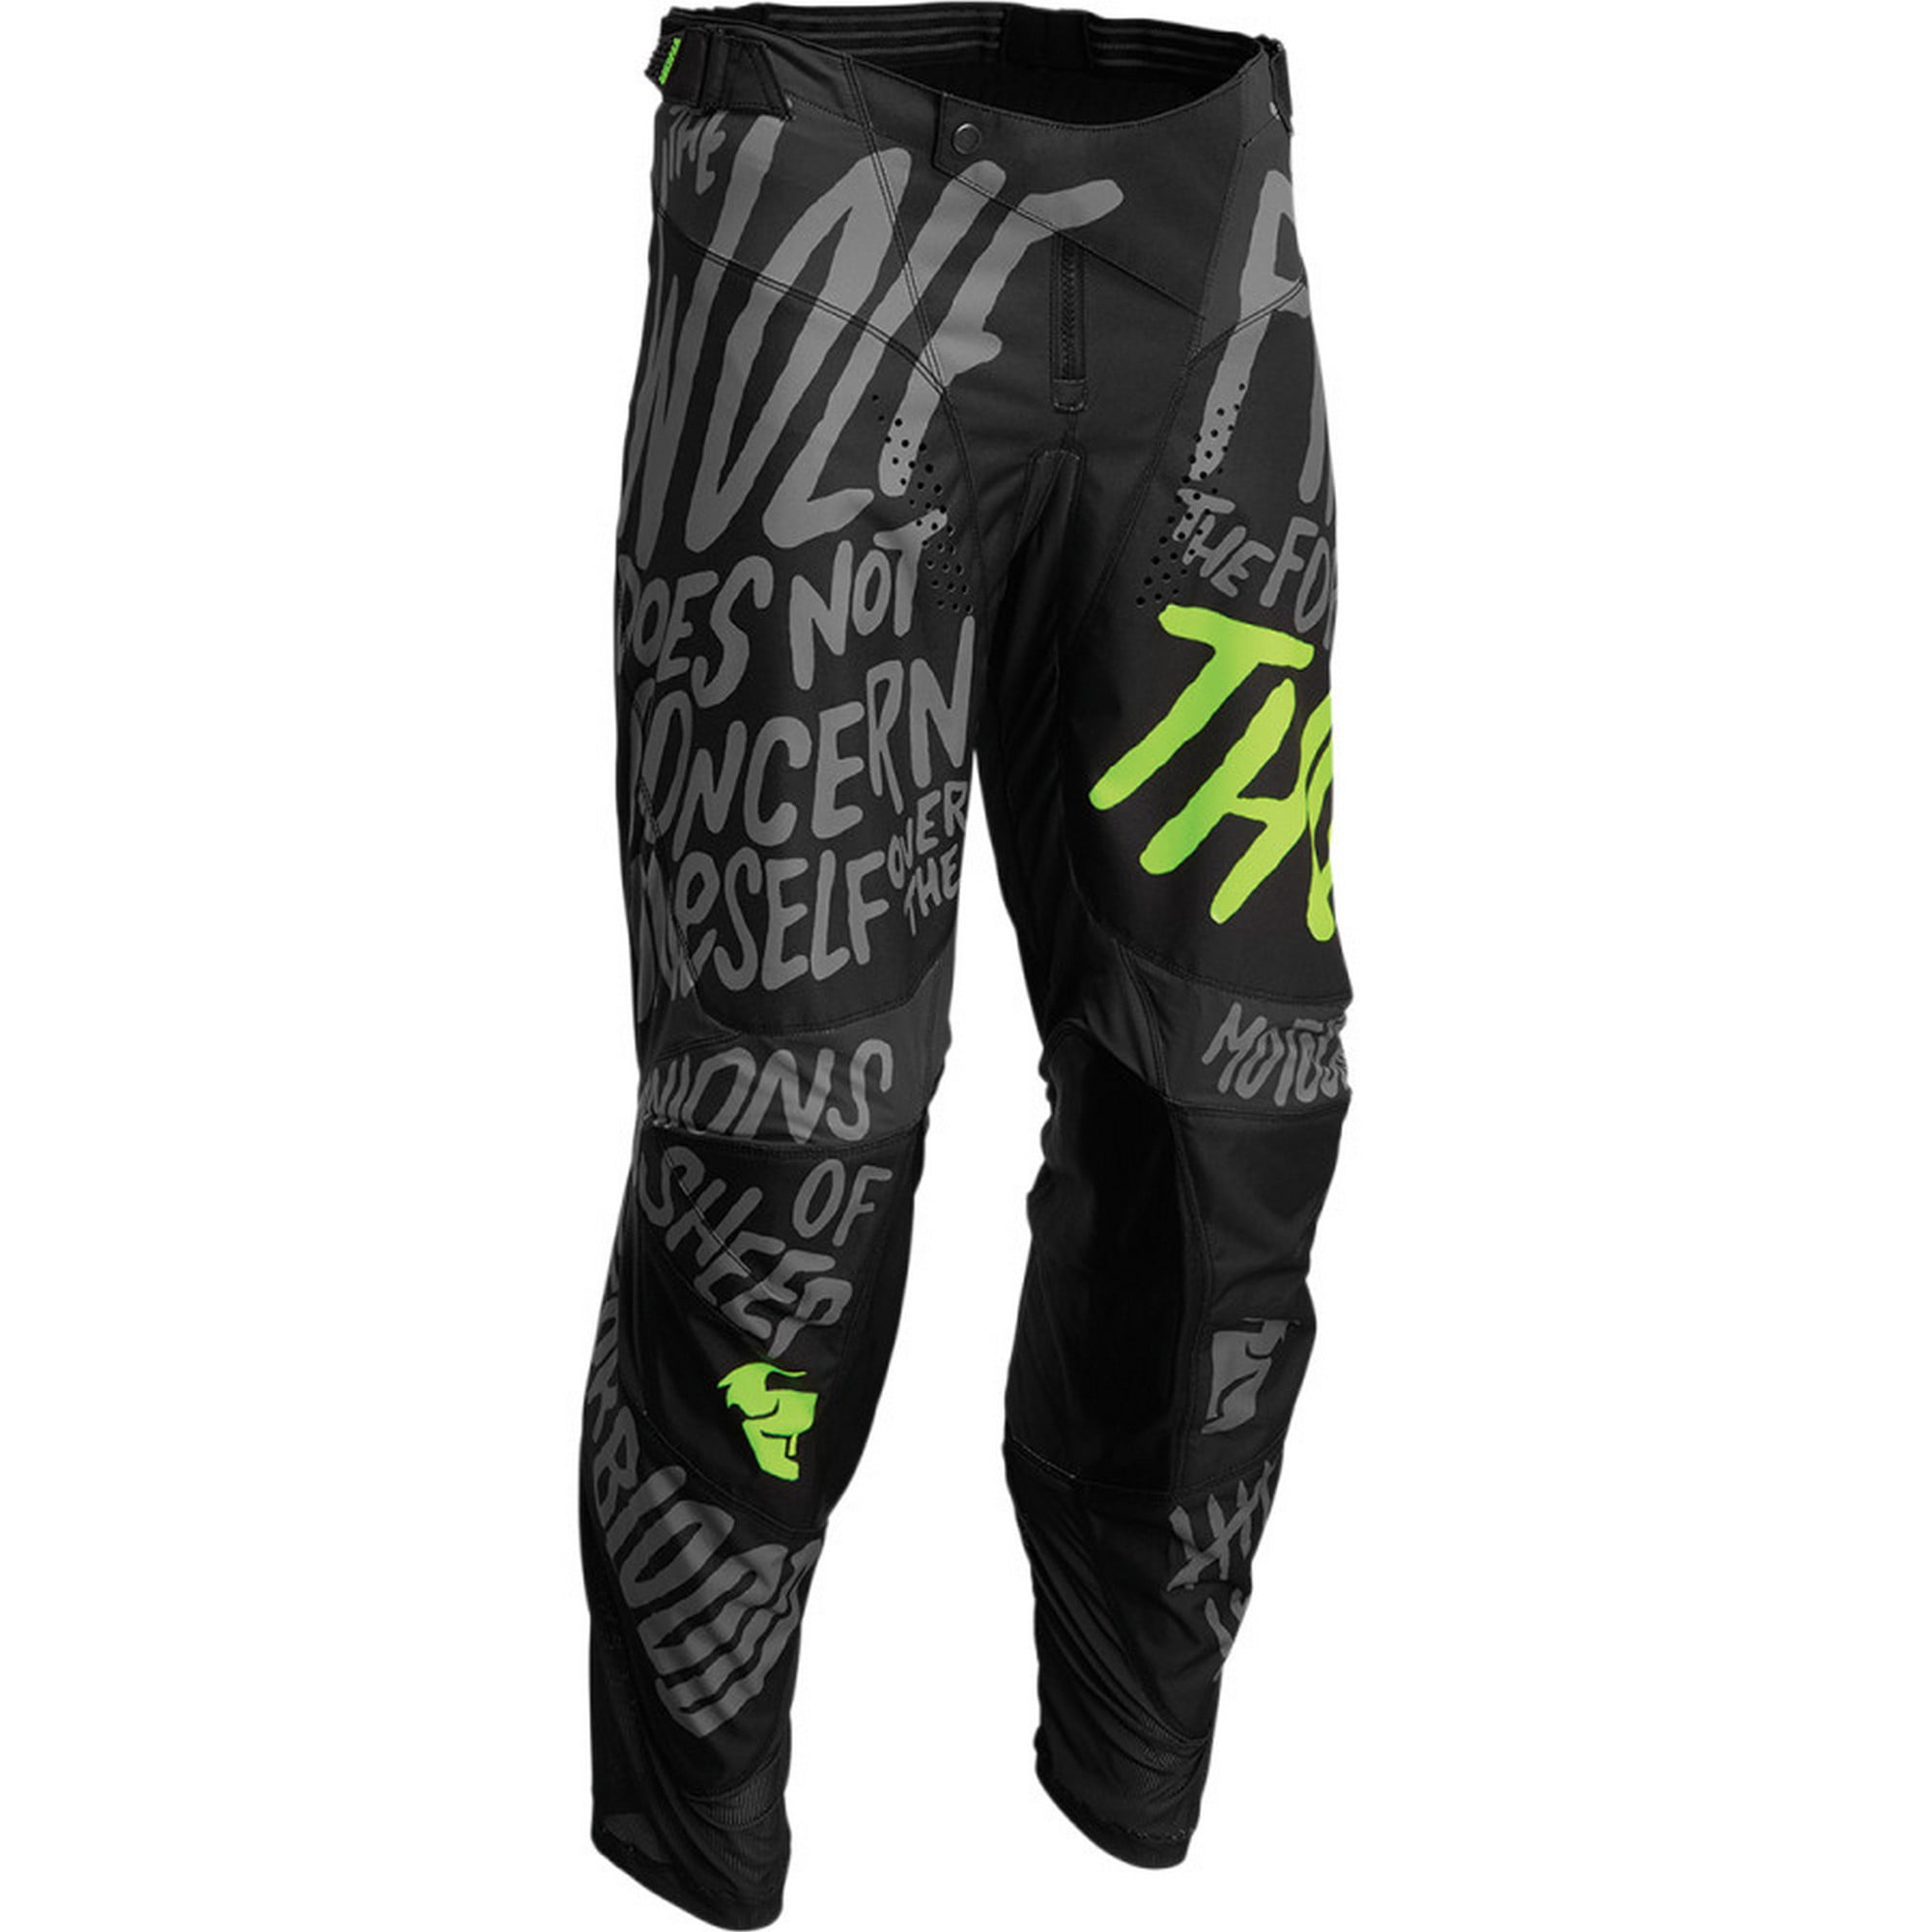 SHIFT FACTION CAMO BLACK YELLOW  MOTOCROSS TROUSERS OFF ROAD SIZE 28 30 32 